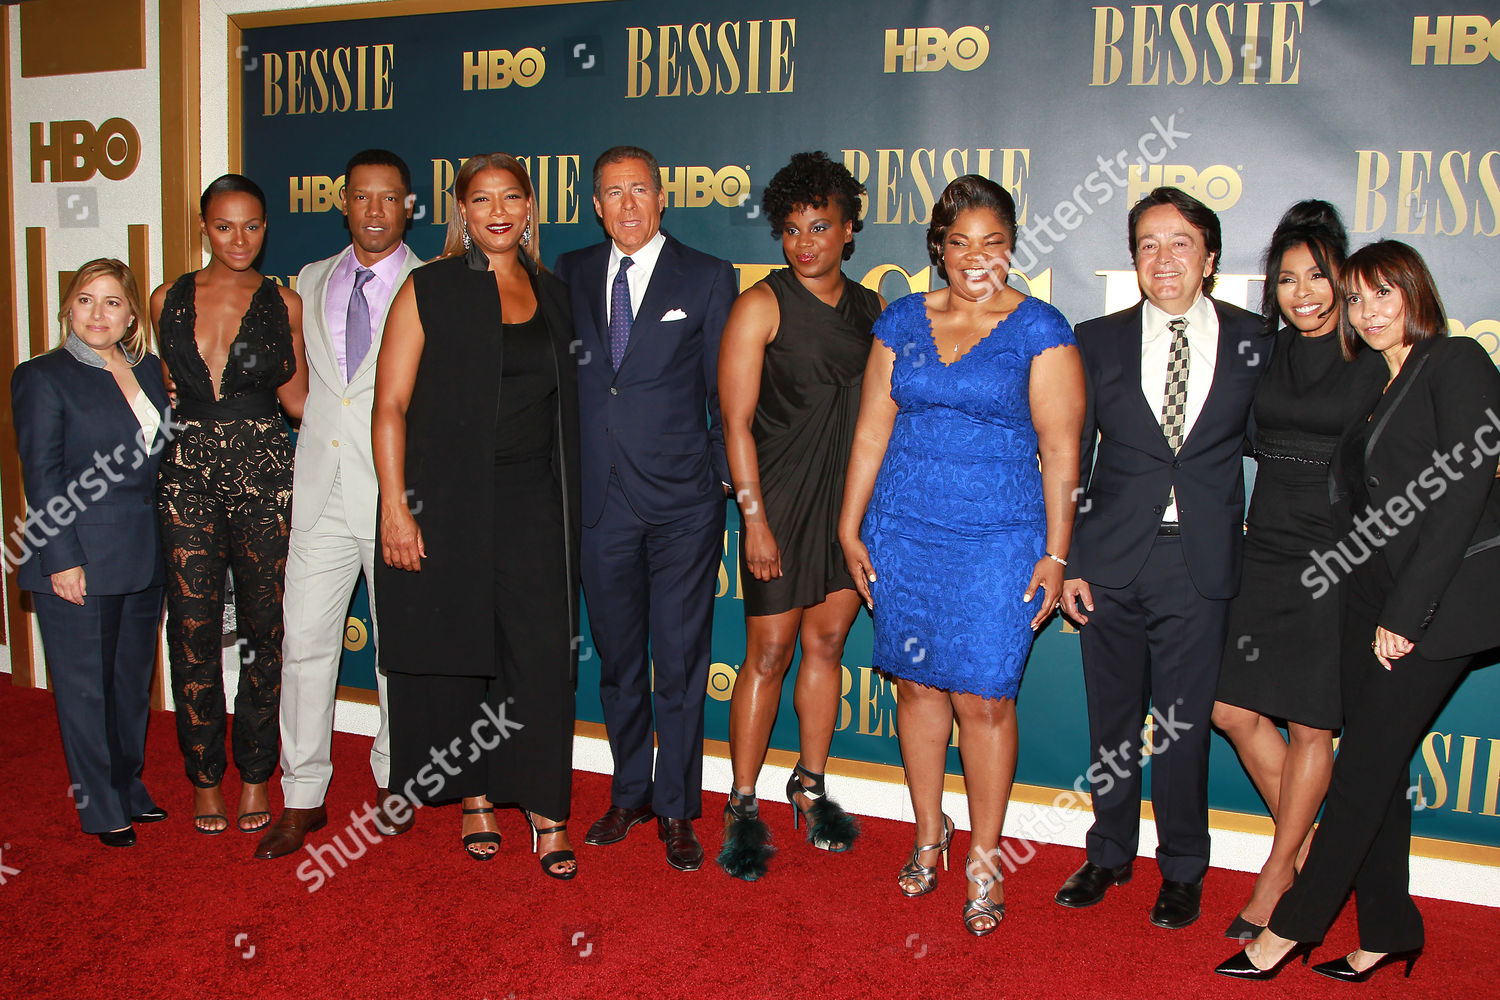 Fascinate tidsplan Nybegynder Cast Bessie Fim makers HBO Excs Editorial Stock Photo - Stock Image |  Shutterstock